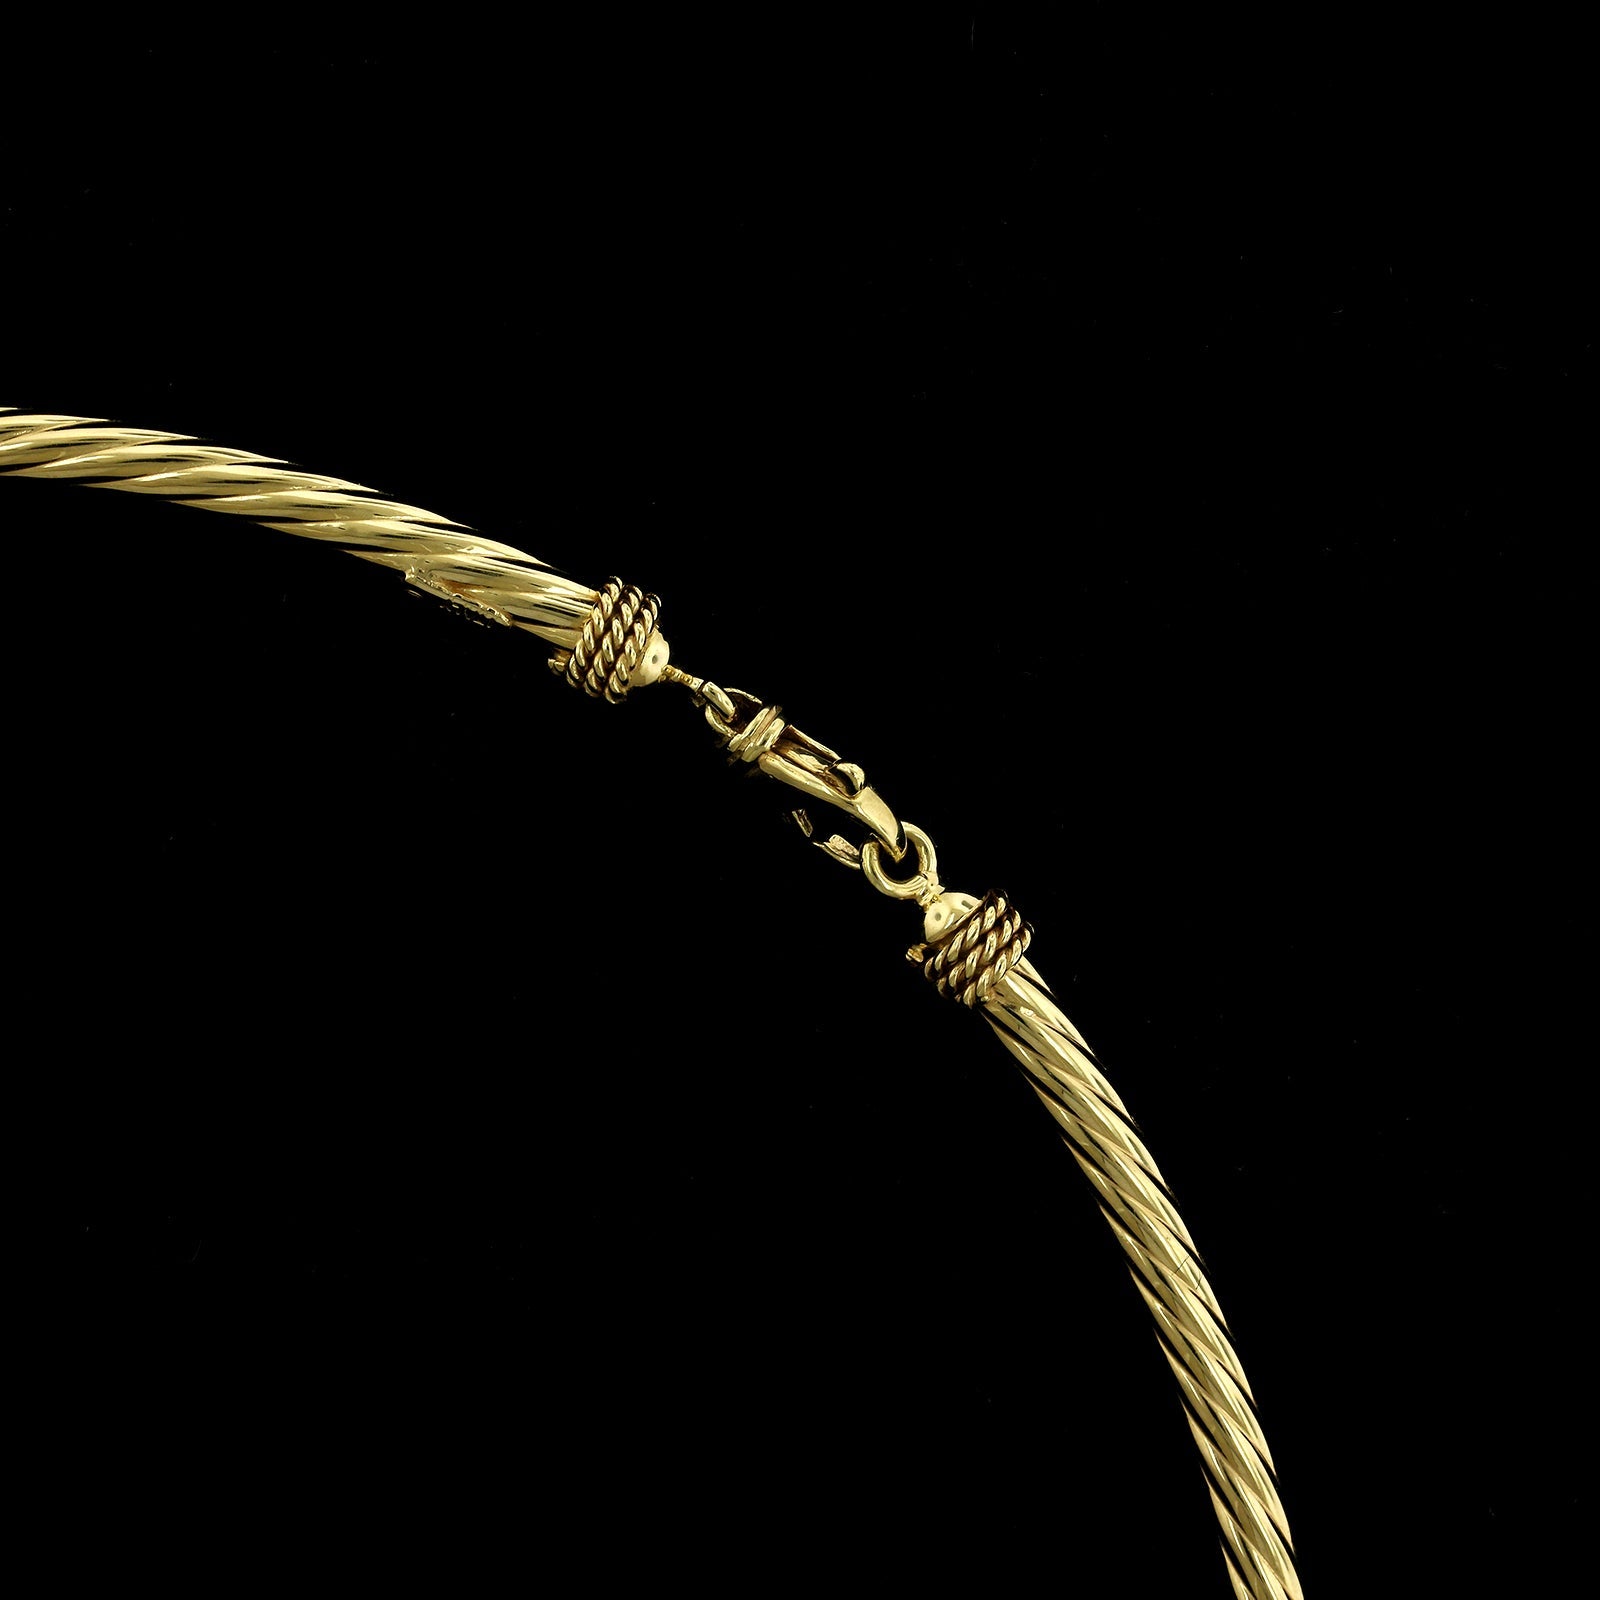 14K Yellow Gold Estate Cable Link Necklace, 14k yellow gold, Long's Jewelers